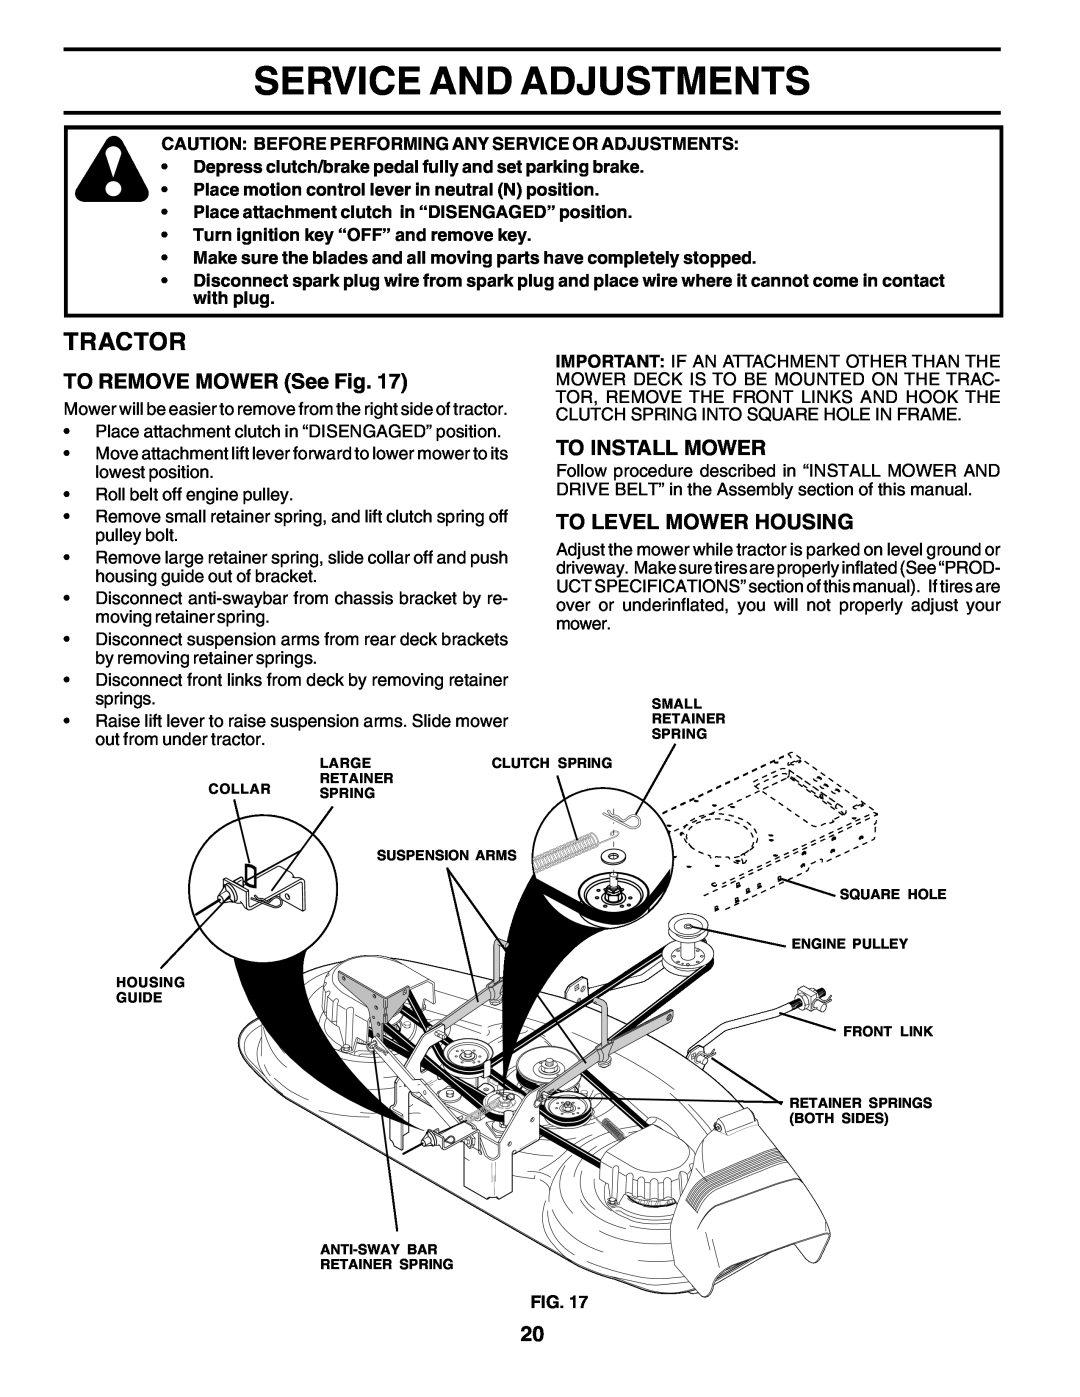 Weed Eater 178387 Service And Adjustments, Tractor, TO REMOVE MOWER See Fig, To Install Mower, To Level Mower Housing 